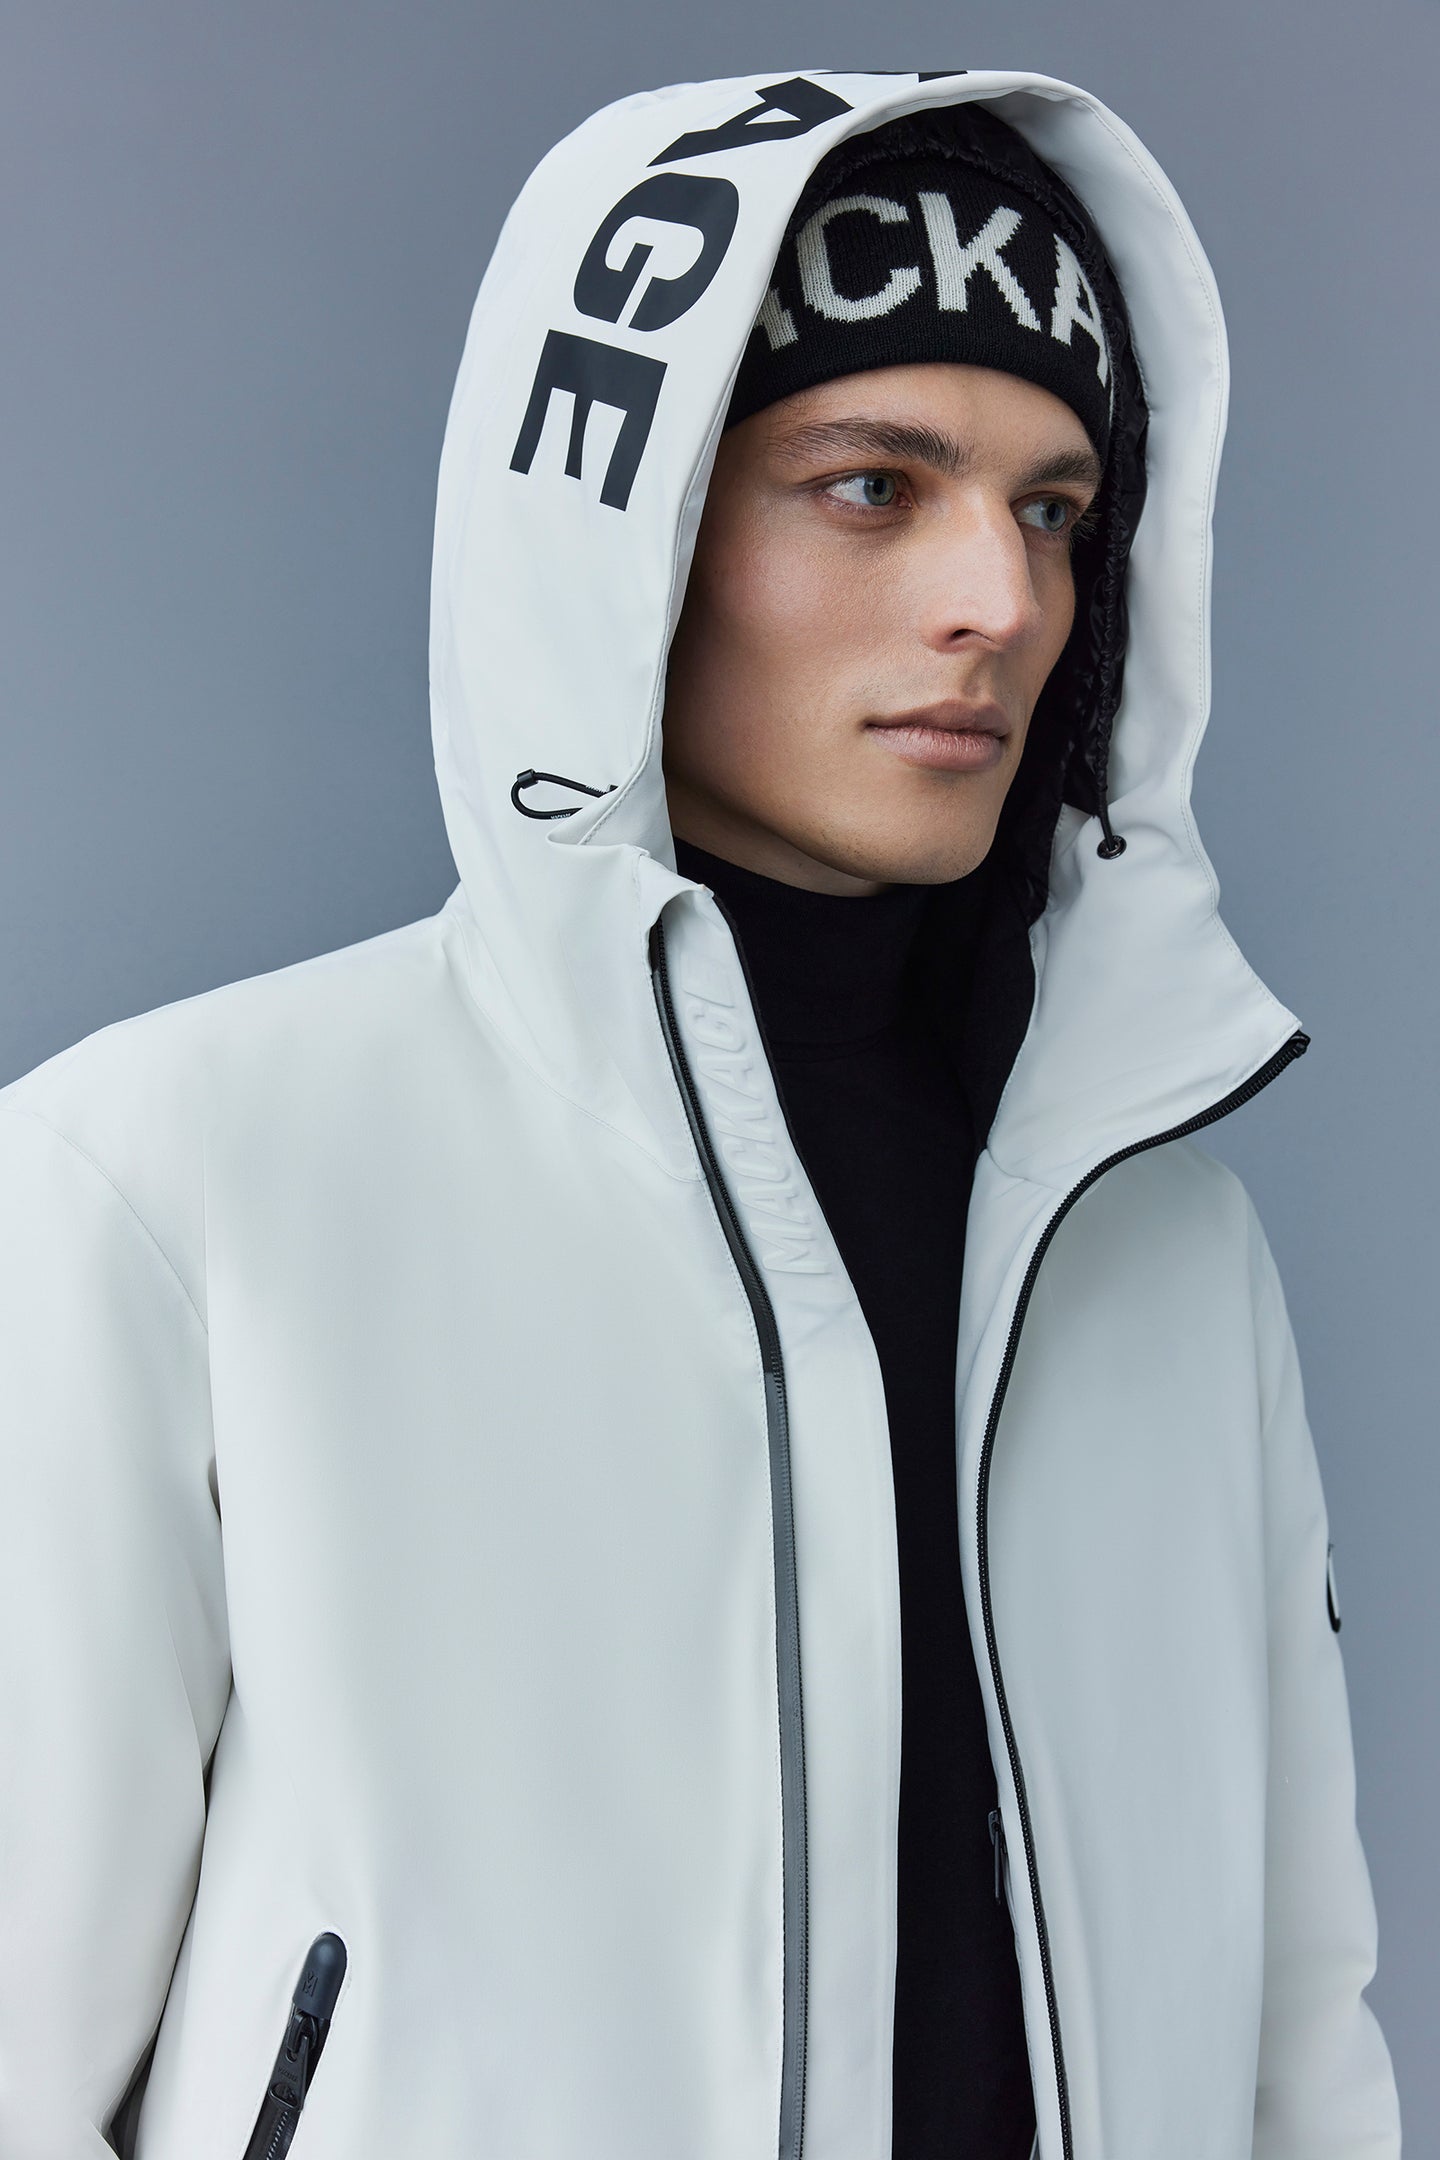 Ski Collection | Mackage® US Official Site